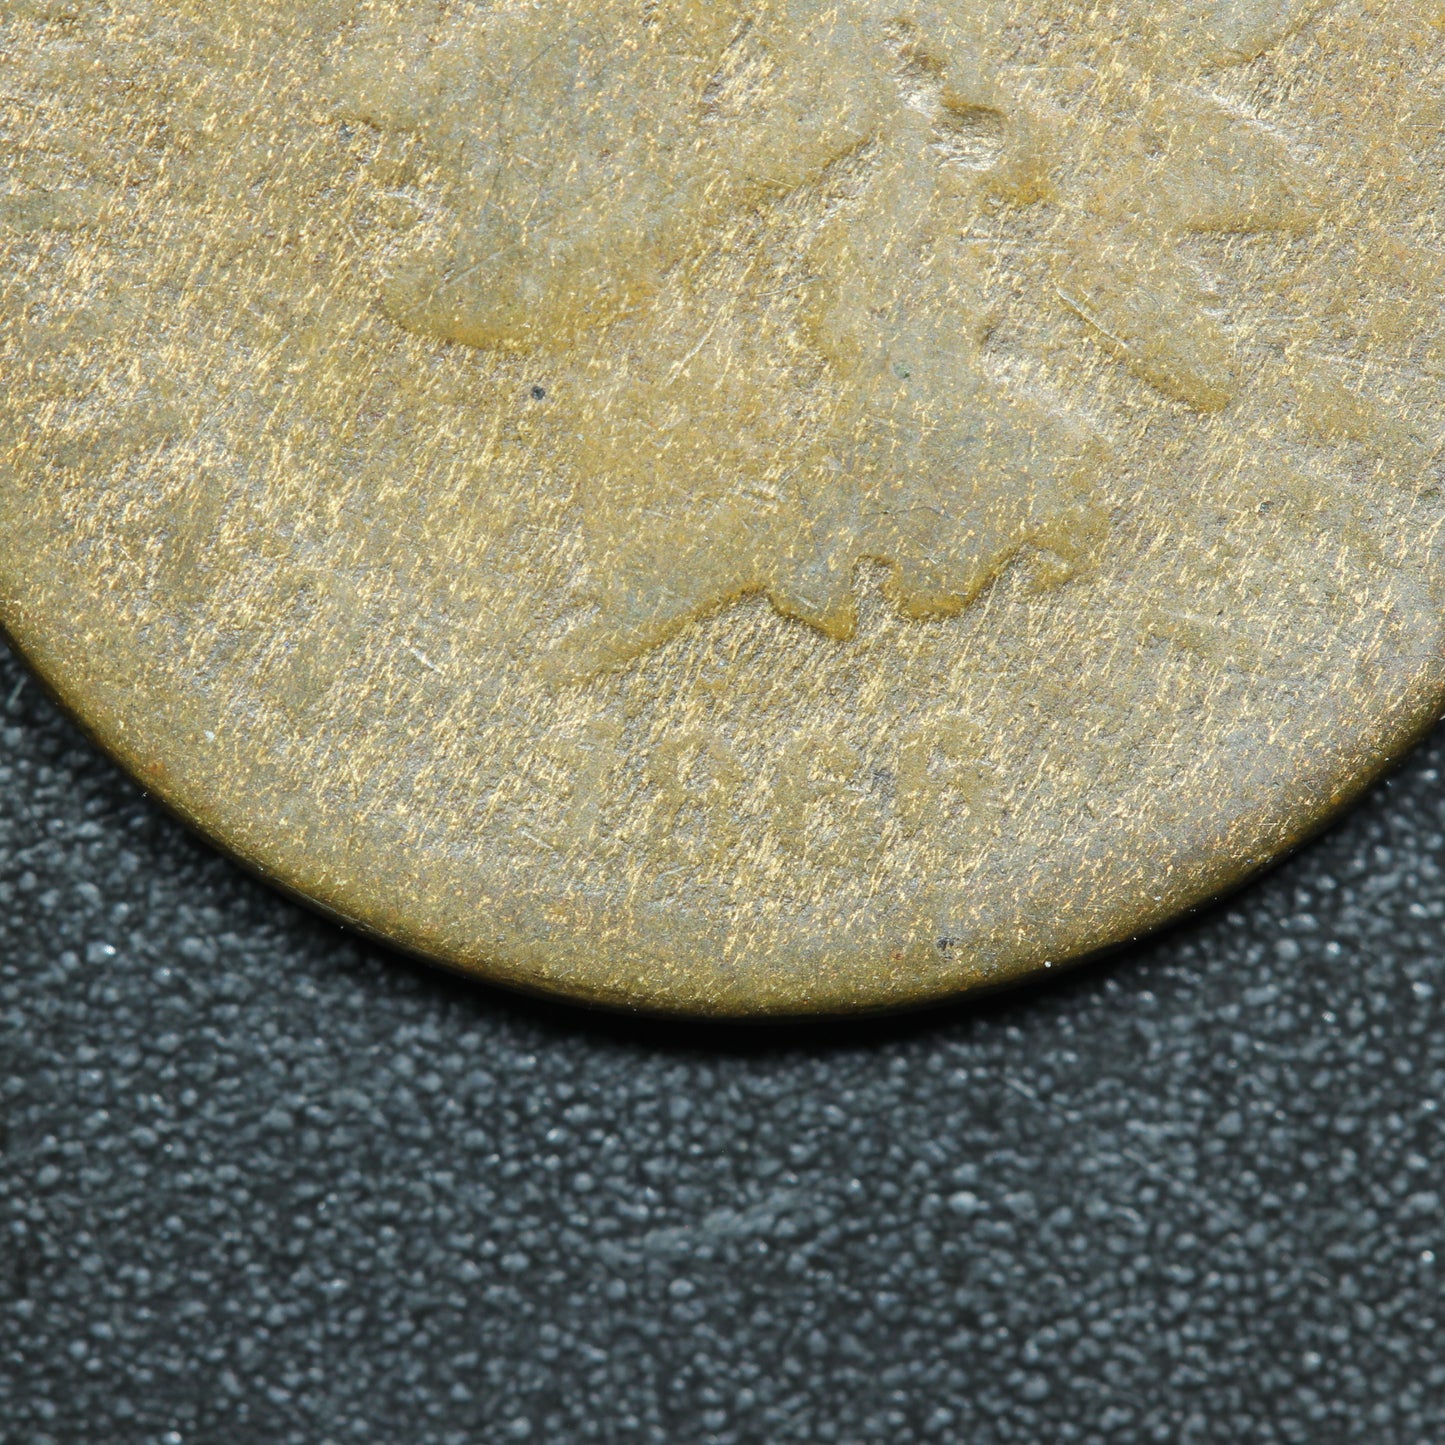 1866 Indian Head Penny